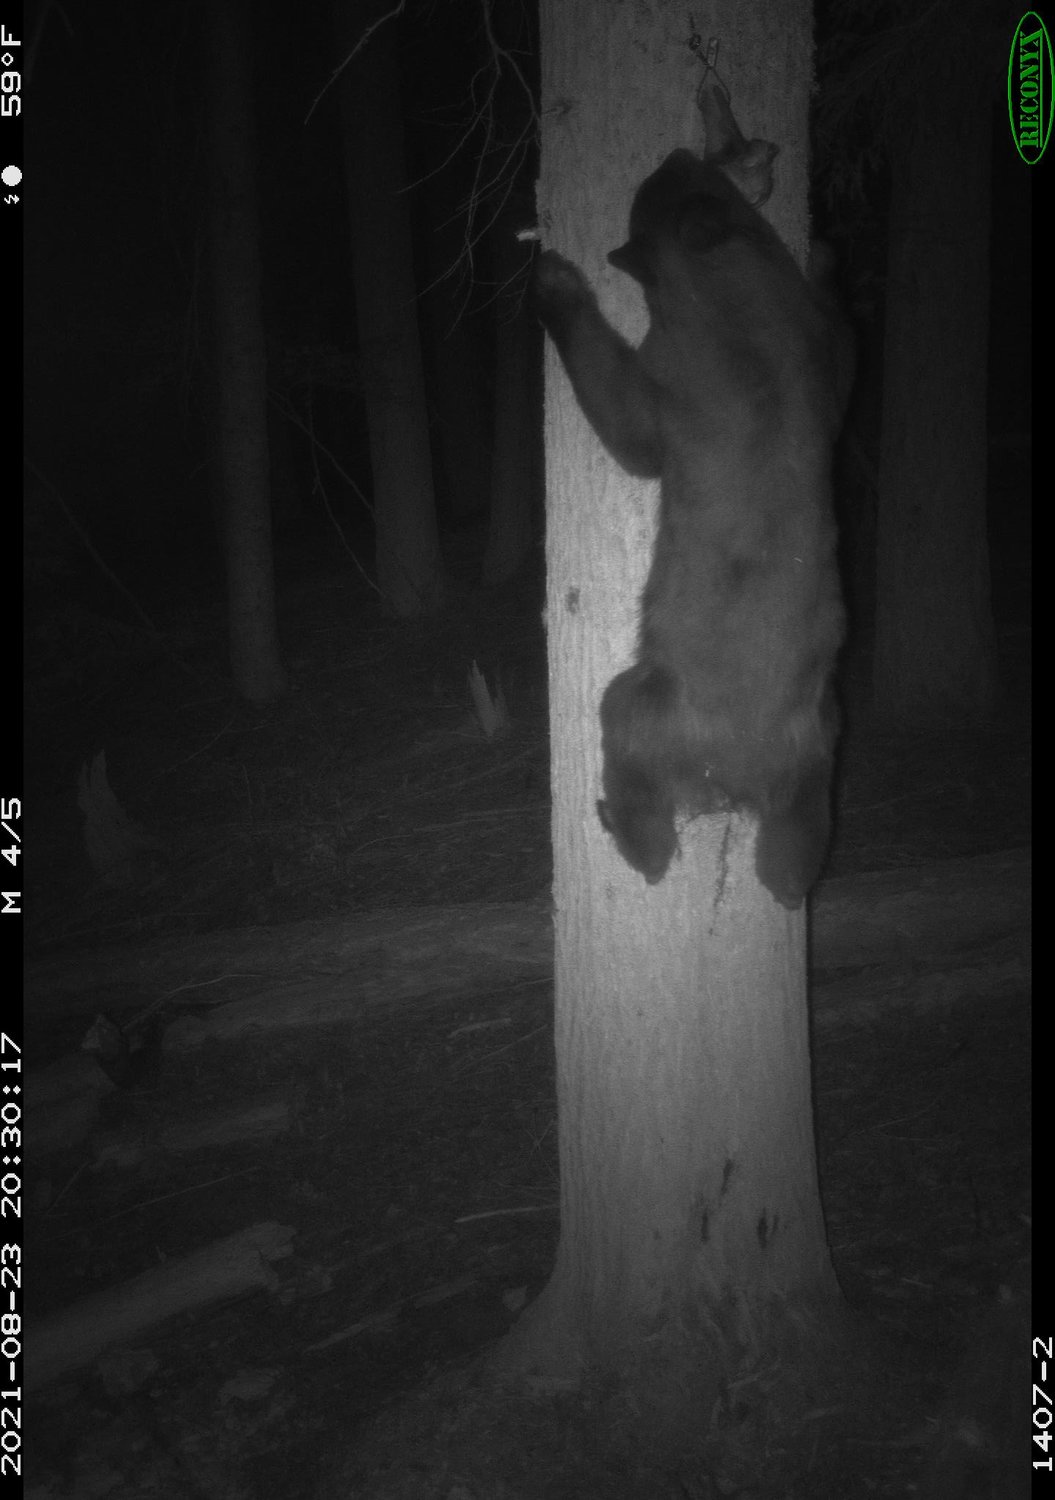 A black bear is pictured in an image from remote camera stations in the Gifford Pinchot National Forest.